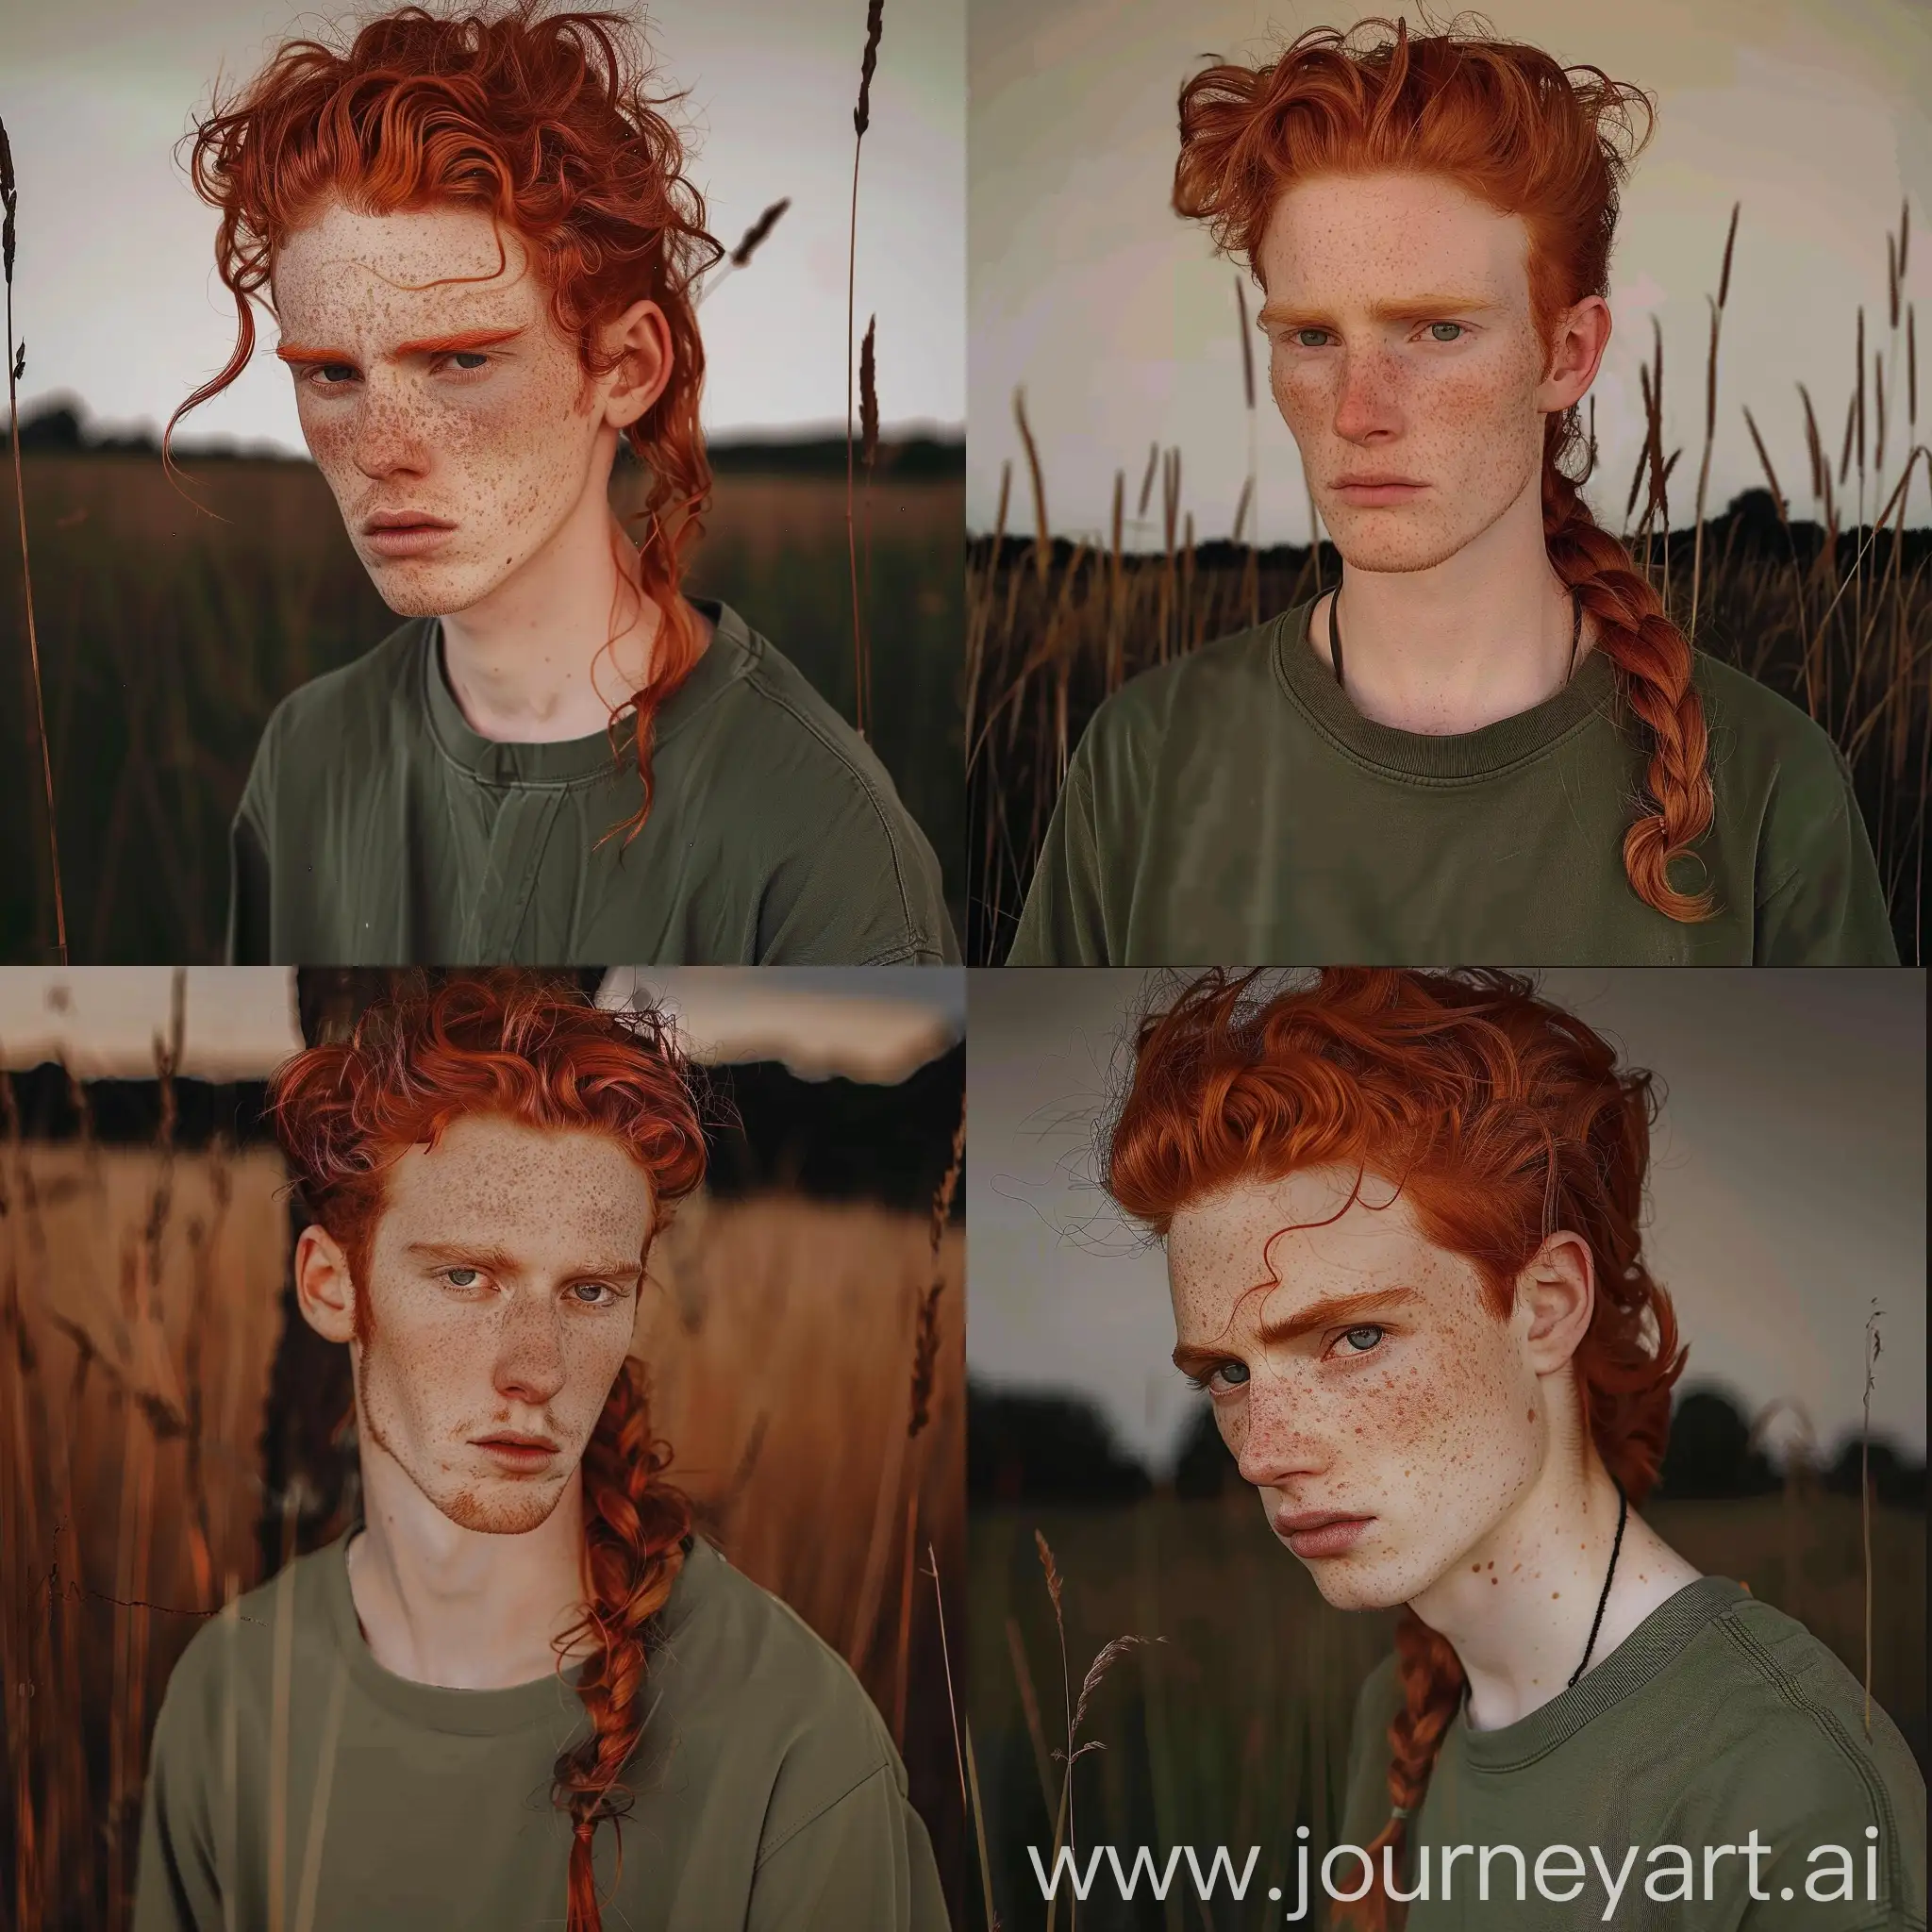 A guy with ginger hair